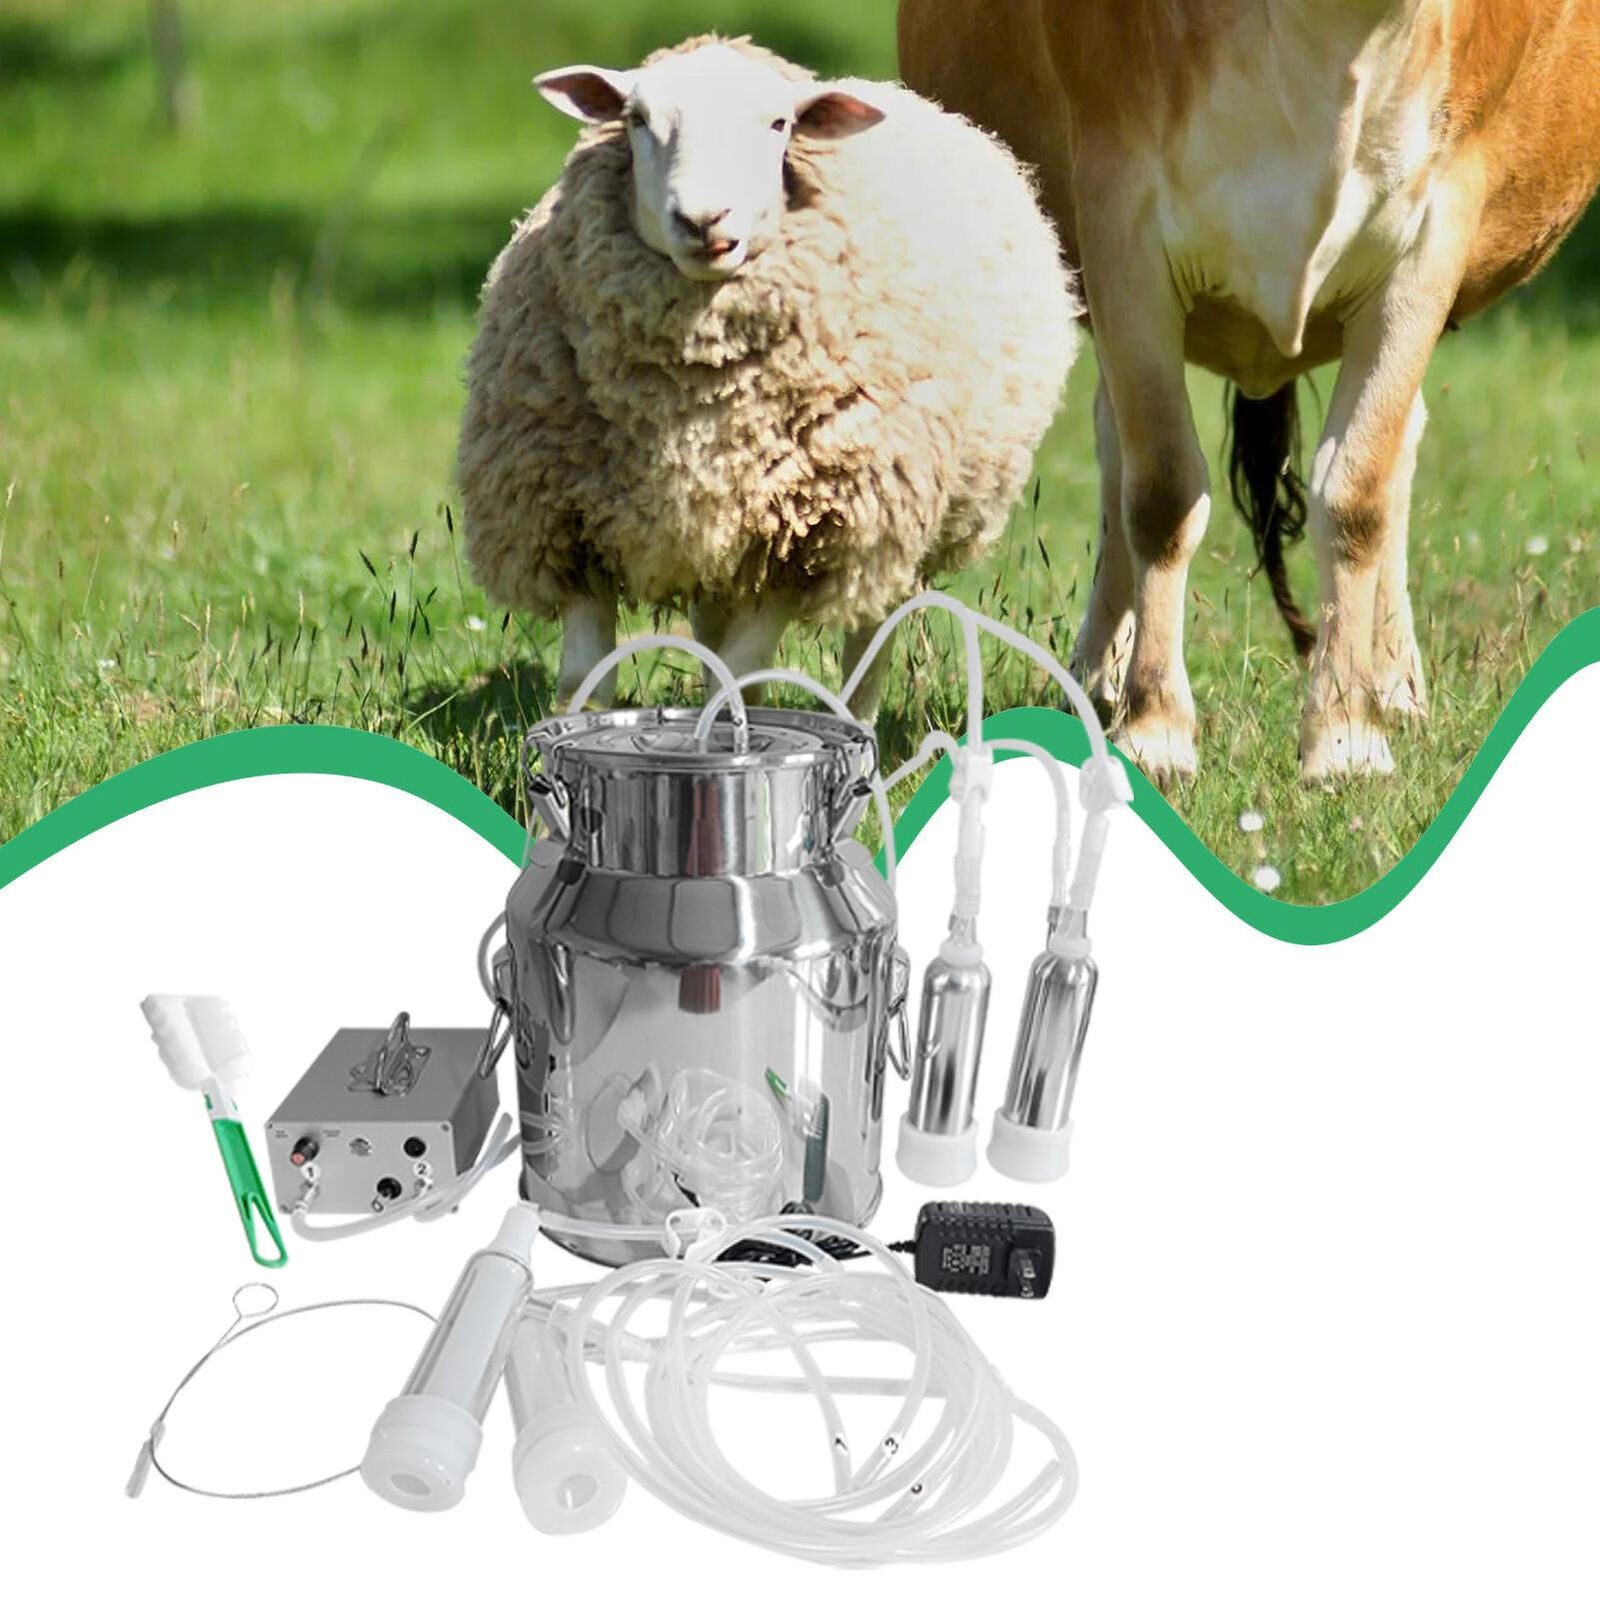 14L Cow Milker Machine Automatic Pulsation Vacuum Milker for Cow and Sheep